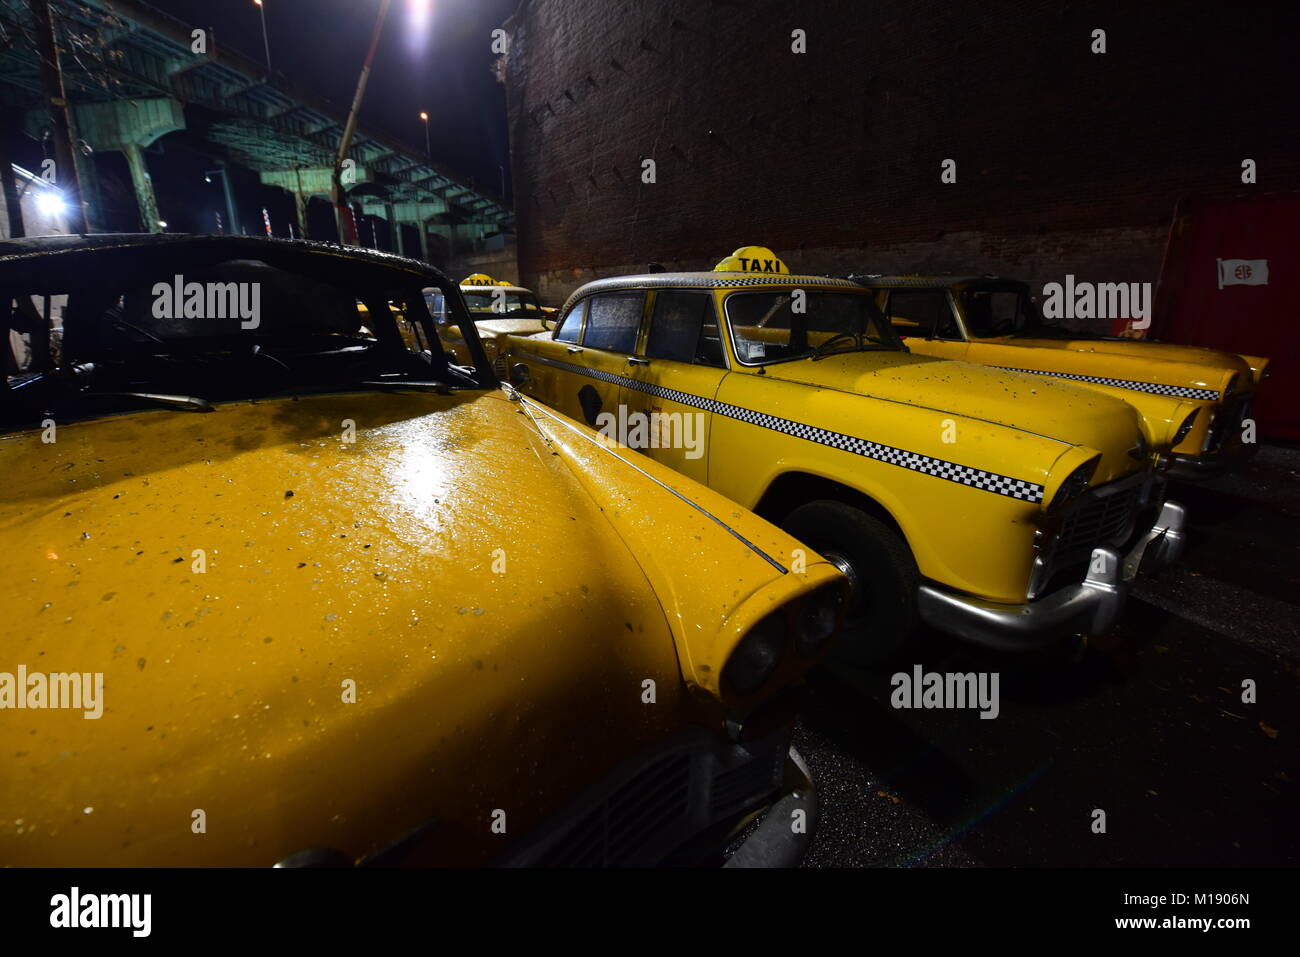 New York City, United States. 27th Jan, 2018. Filming continued with a bang on Martin Scorsese's 66th motion picture as director, 'The Irishman,' as pyrotechnic shots were completed in Brooklyn's Gowanus neighborhood. The film stars Robert De Niro, Joe Pesci and Al Pacino, and which depicts an aging hitman's recollection of assassinating Teamster's boss Jimmy Hoffa. Credit: Andy Katz/Pacific Press/Alamy Live News Stock Photo